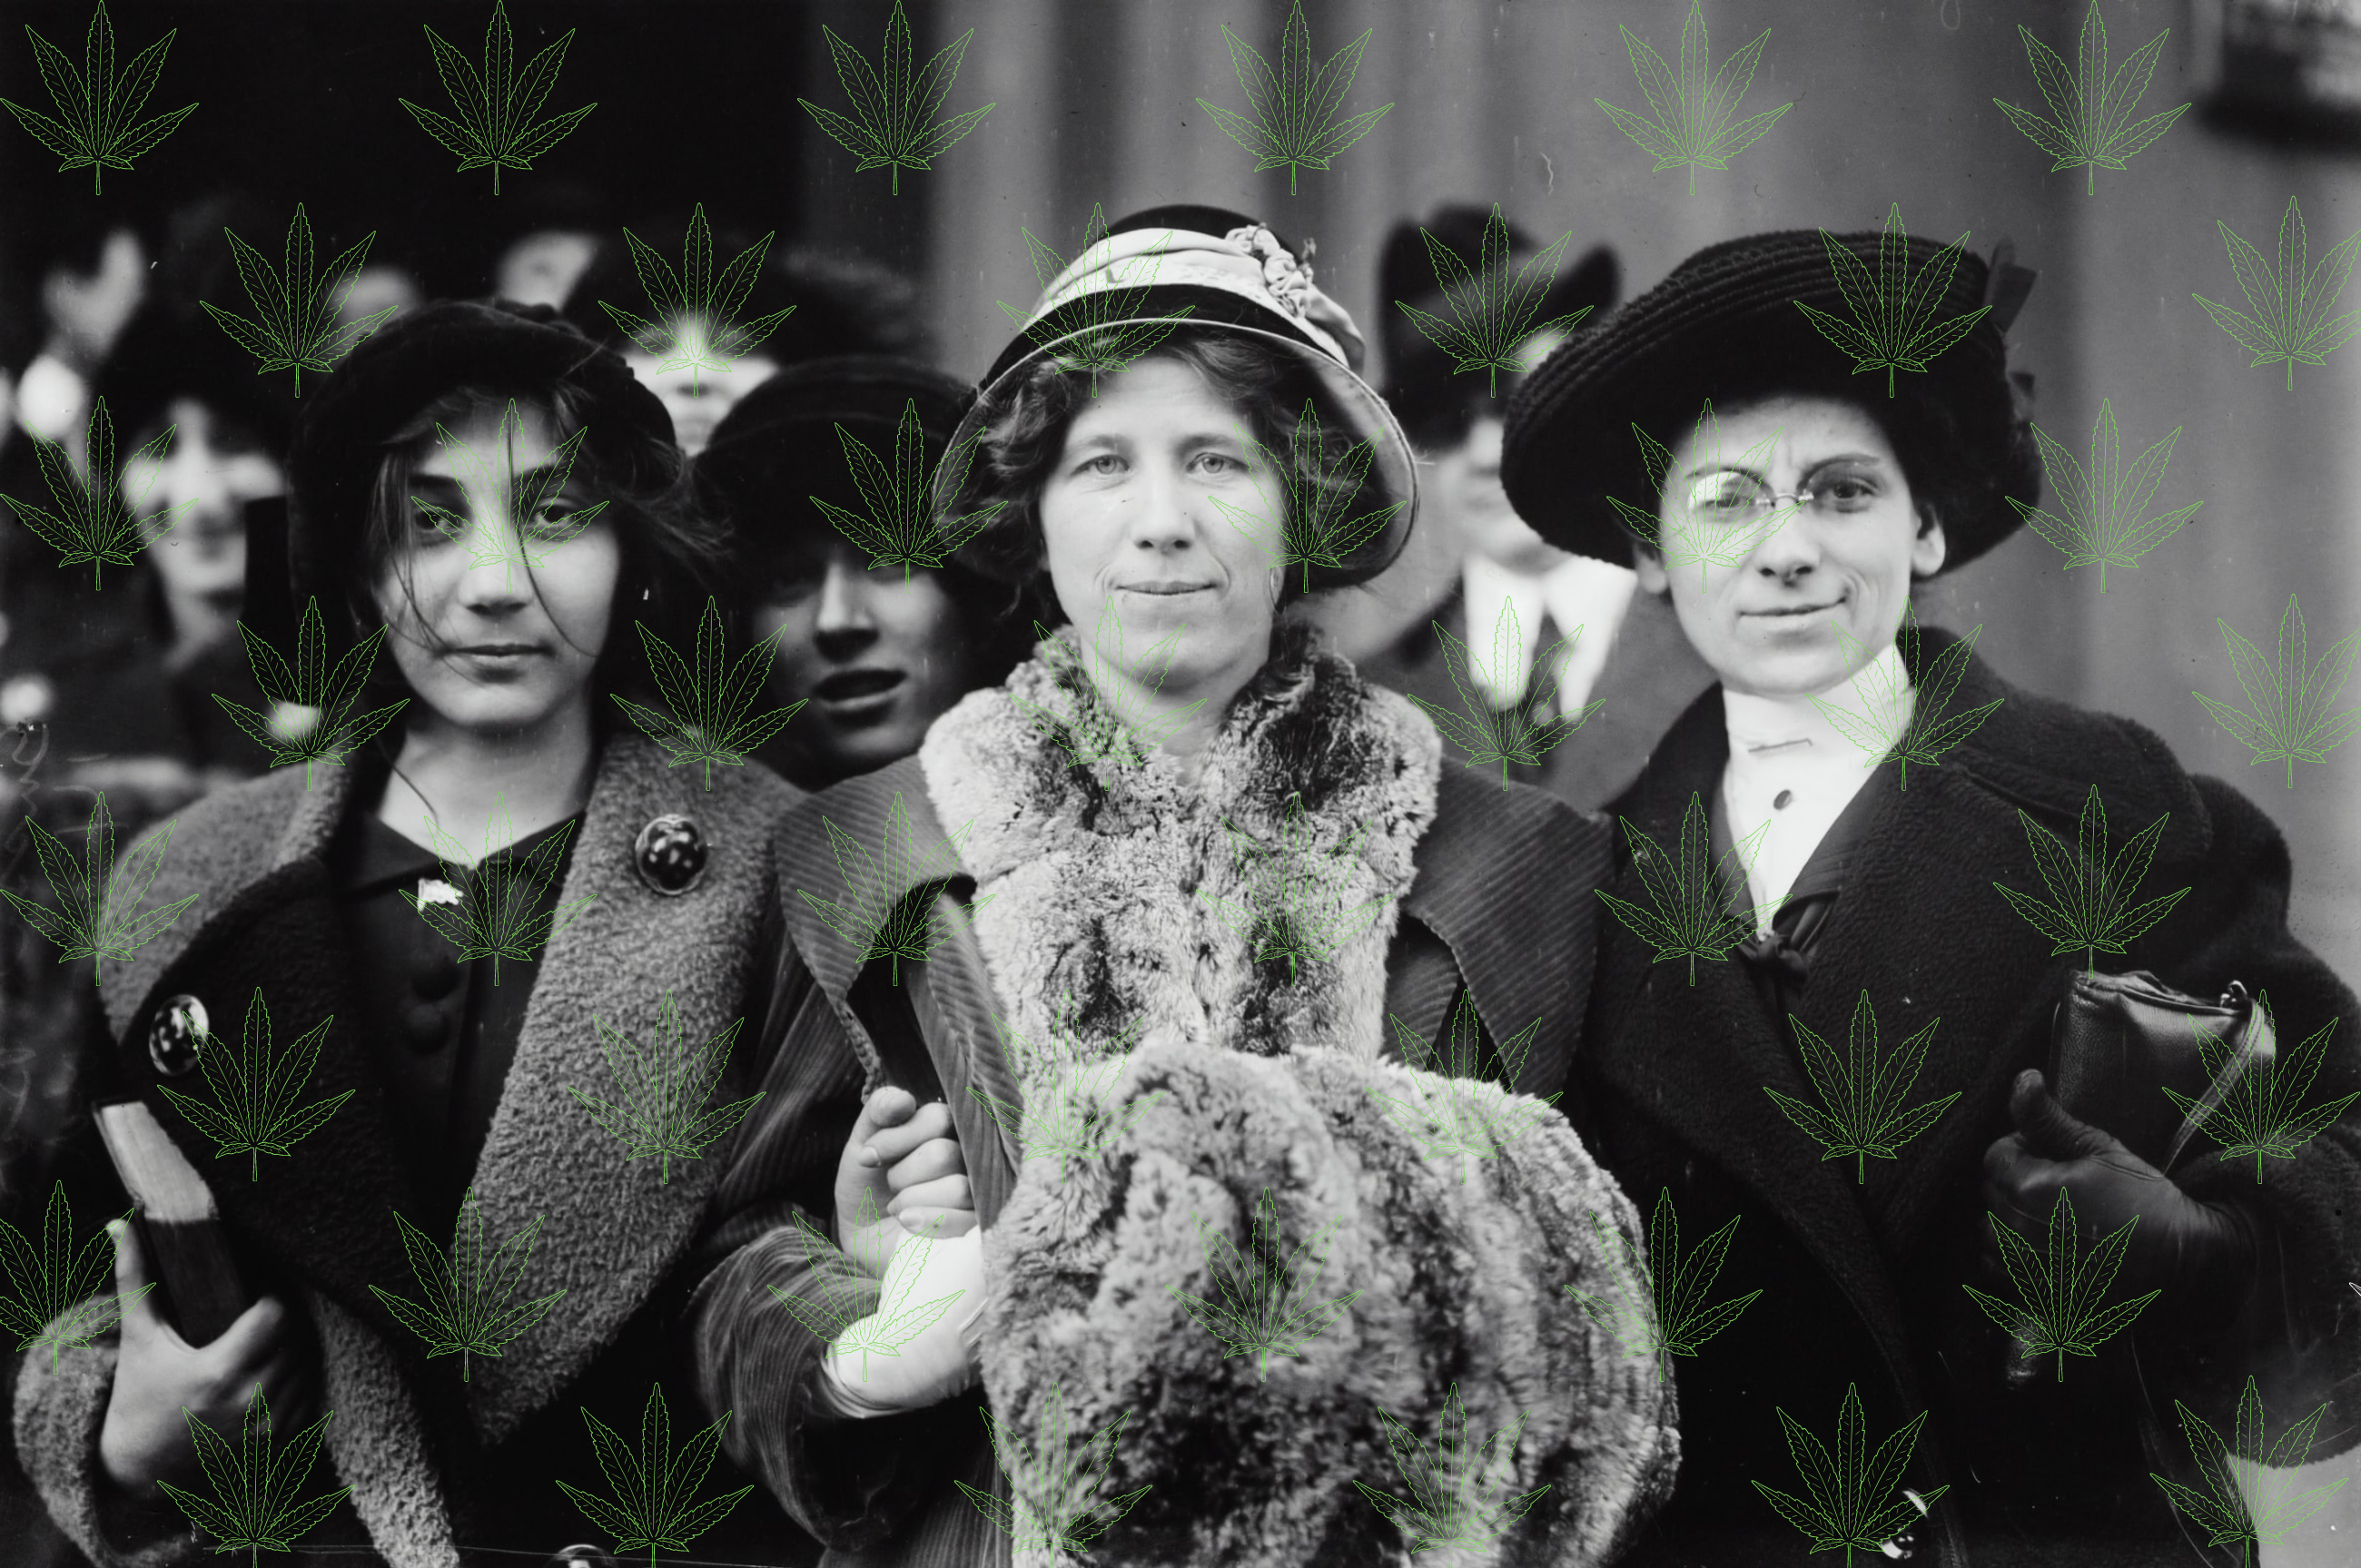 Vintage black & white photo of three white women wearing winter jackets & hats standing side by side with repeated green marijuana leaf print design overlay